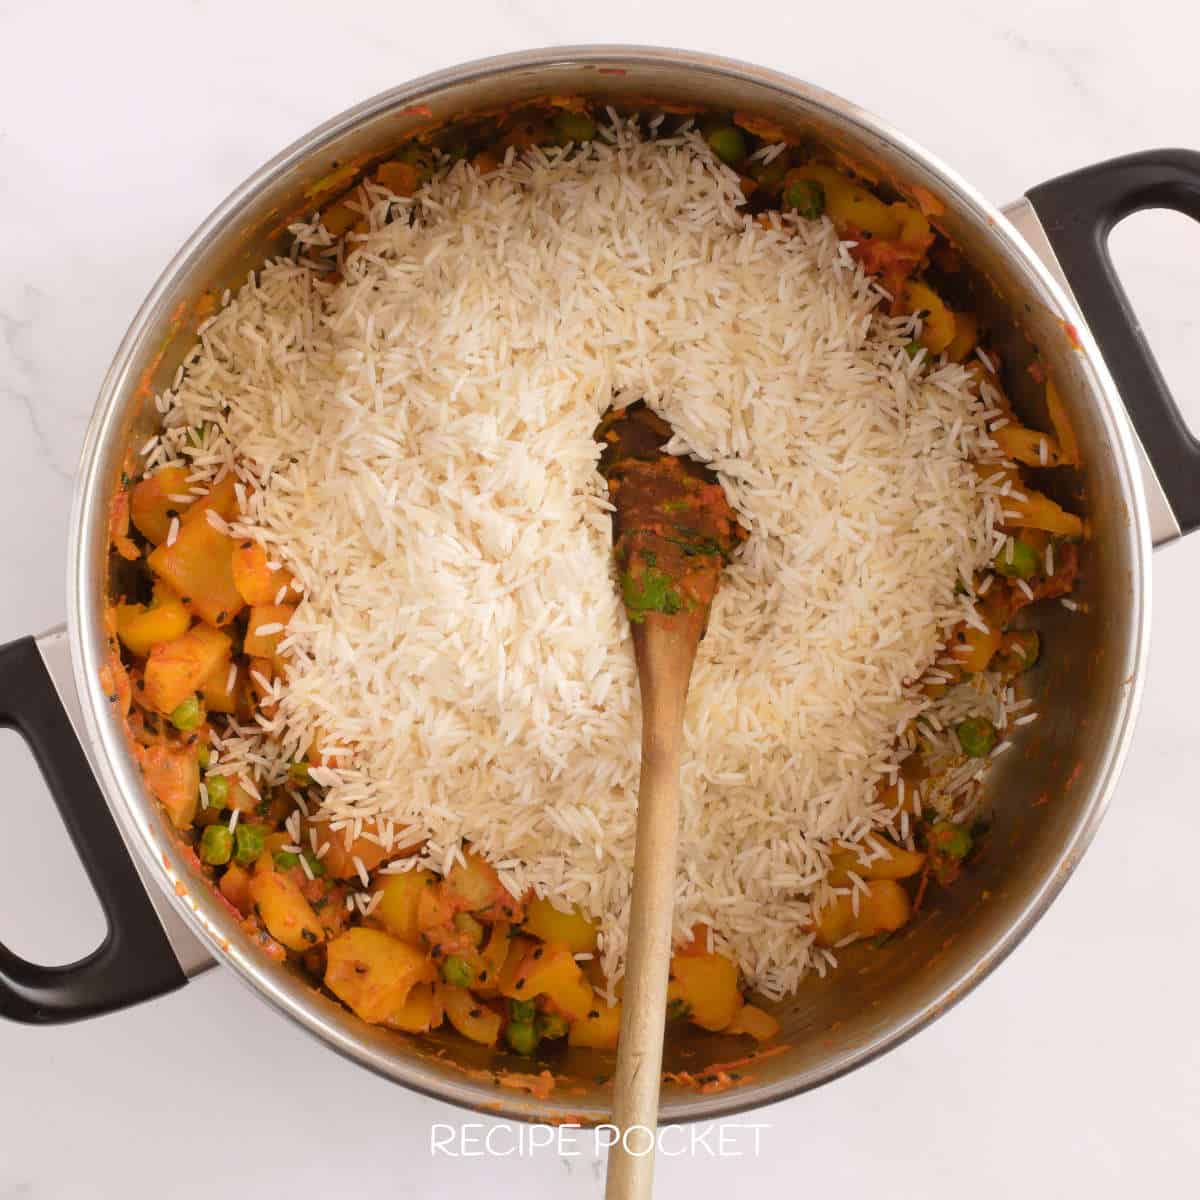 Rice in a pot with cooked vegetables.